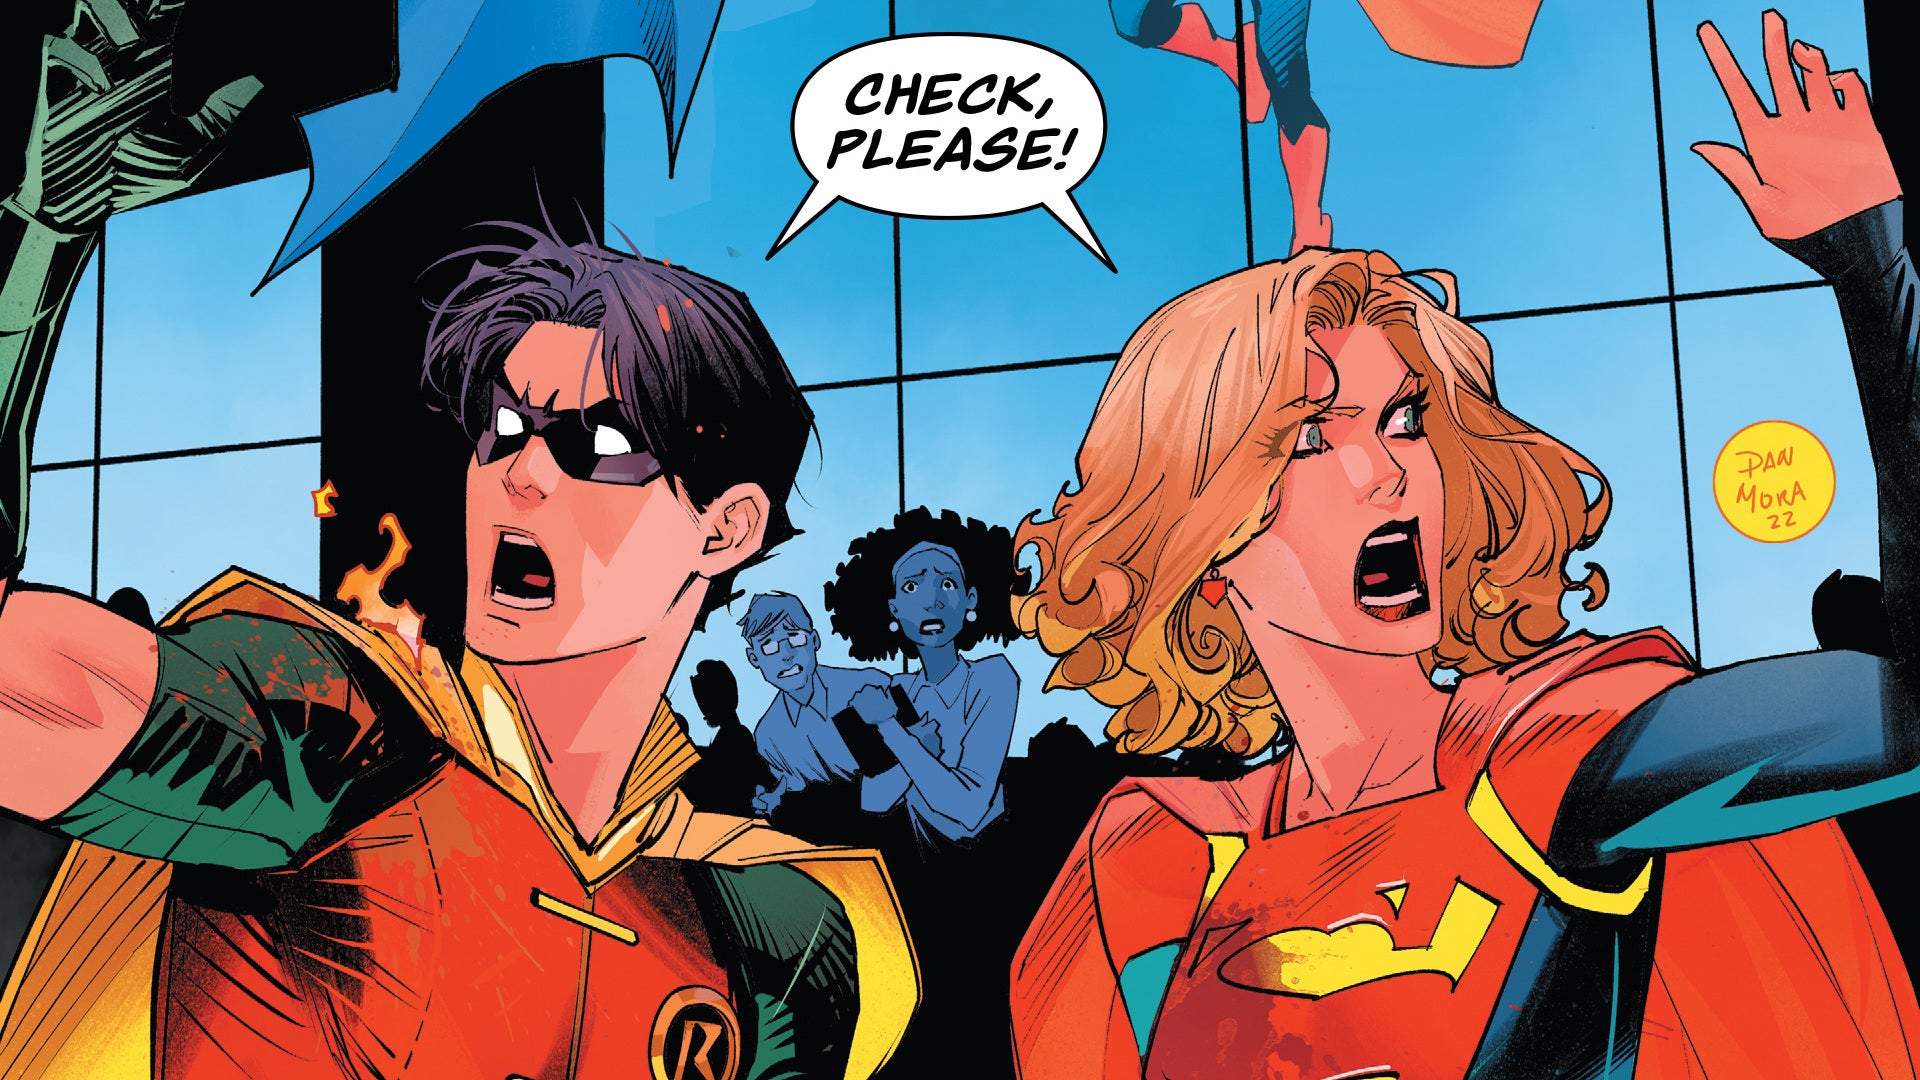 Robin and Supergirl ask for a dinner check